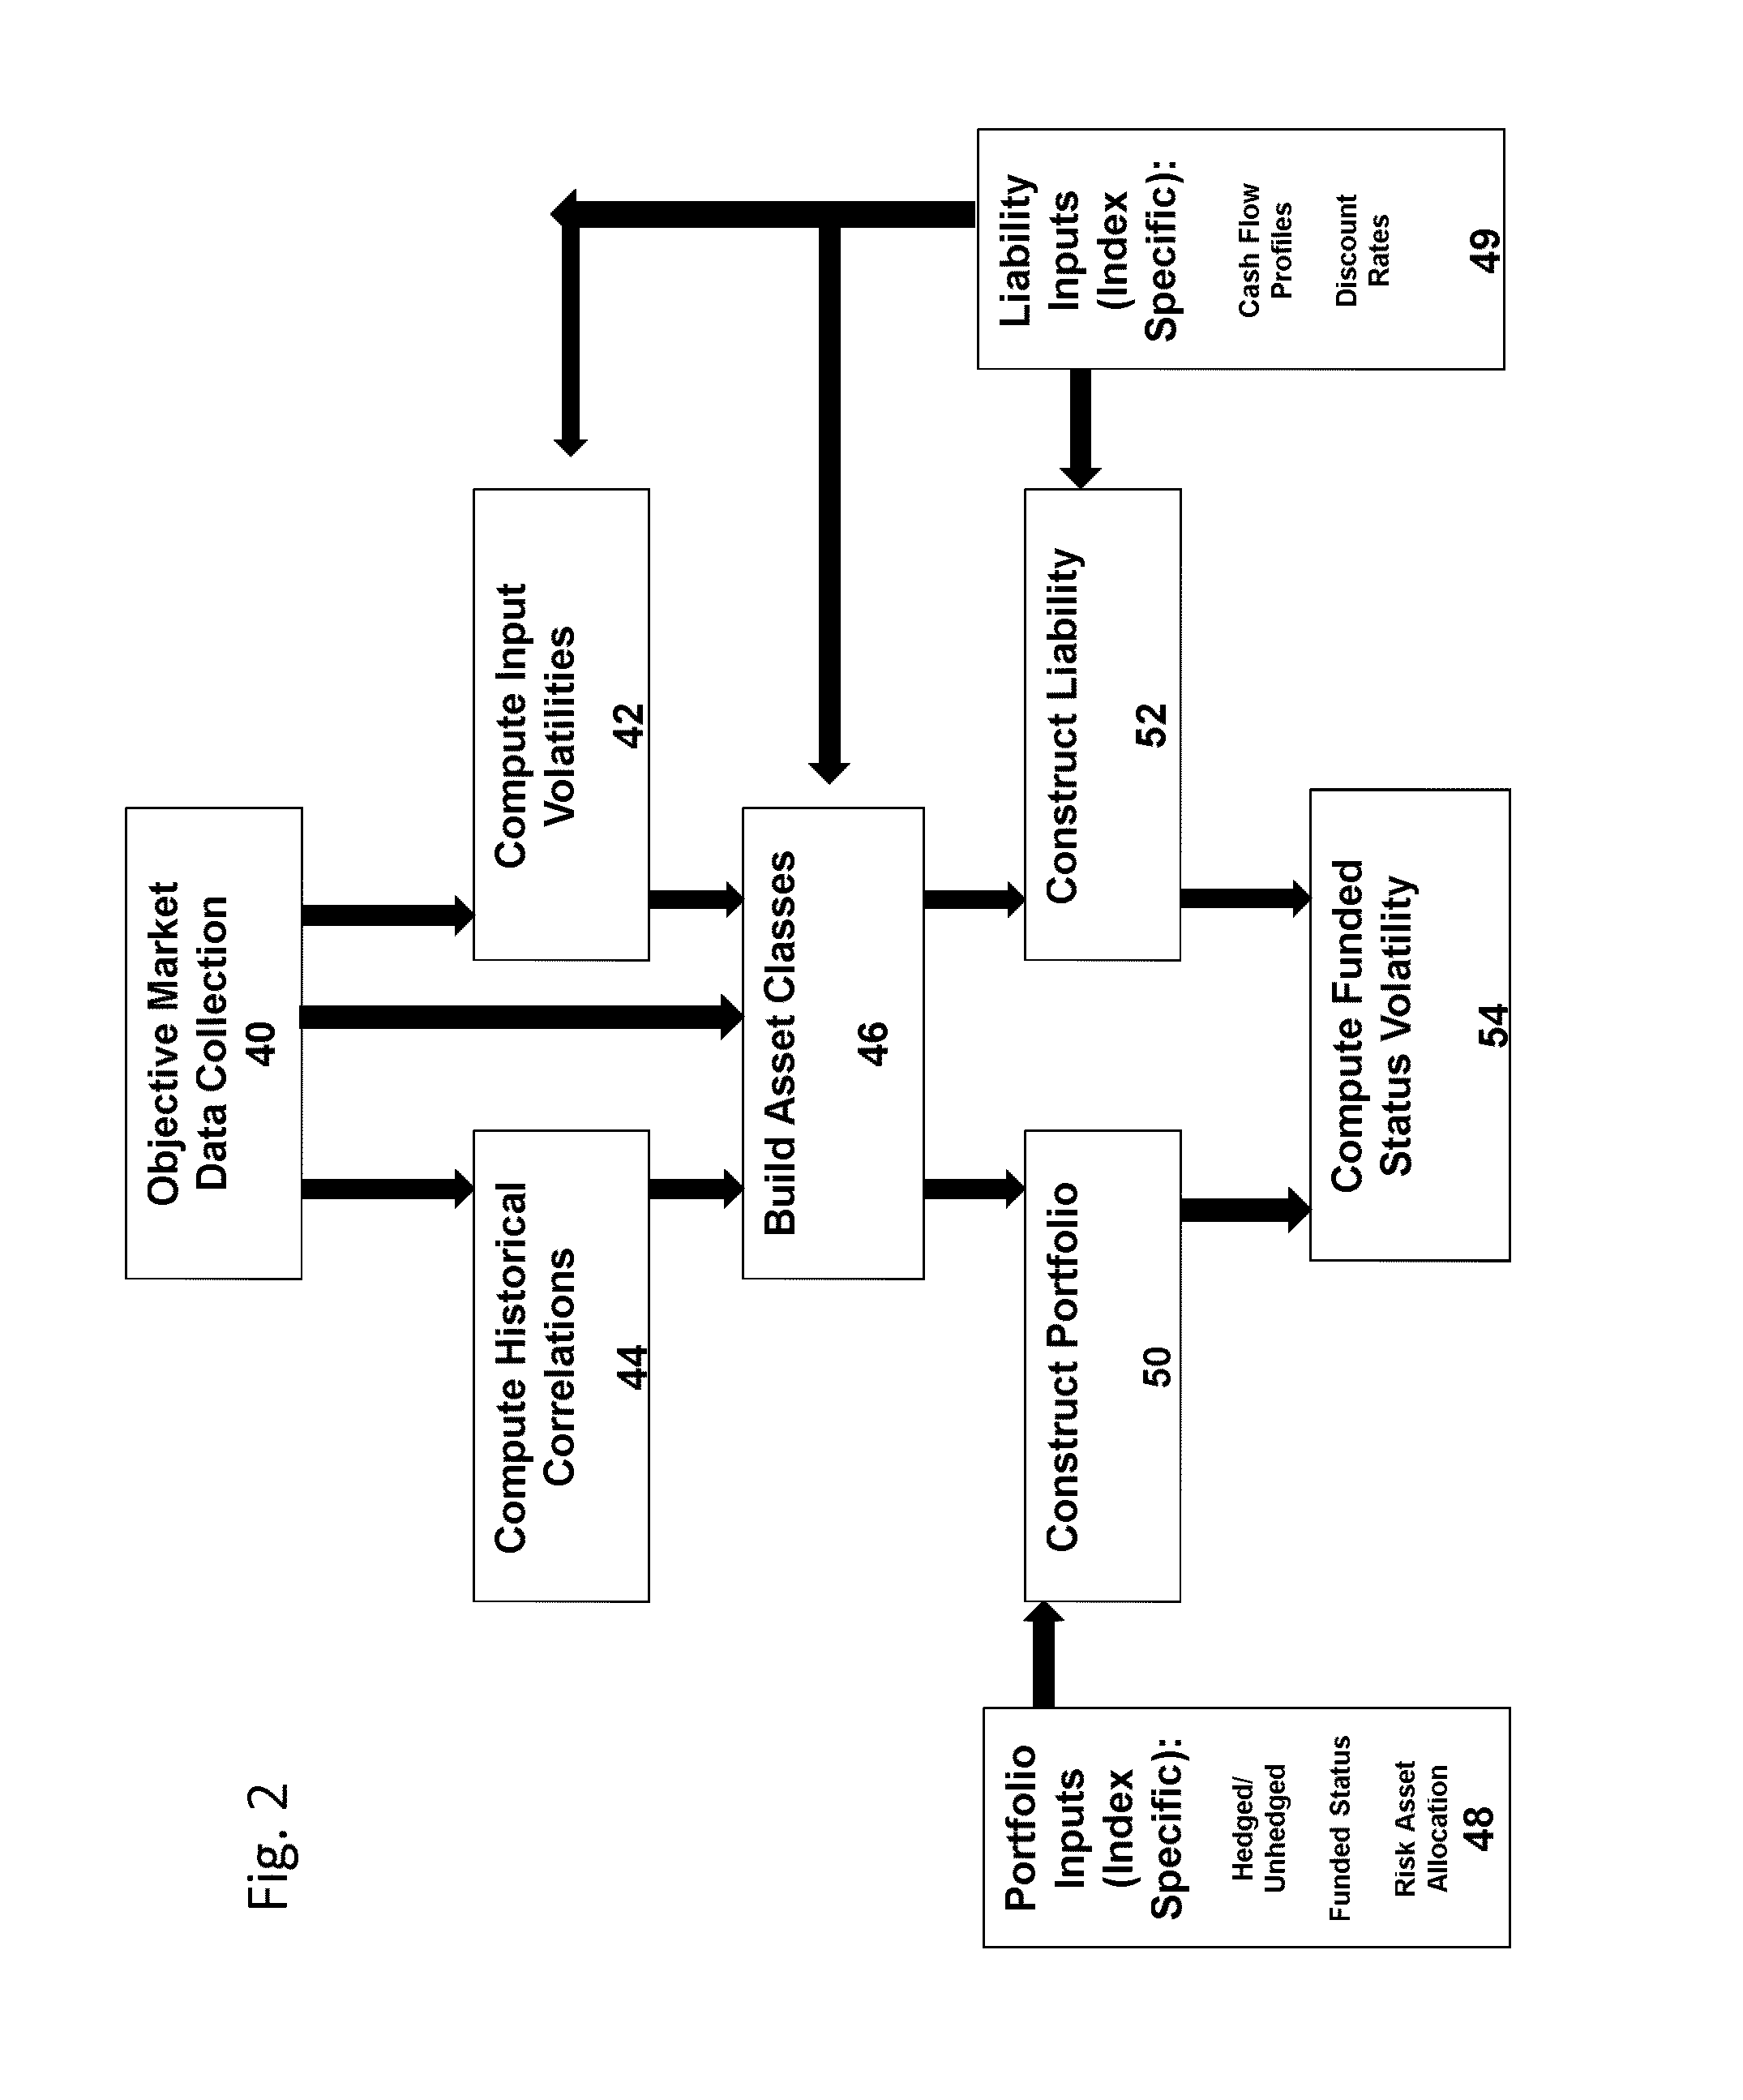 Method and Apparatus of Determining Funded Status Volatility